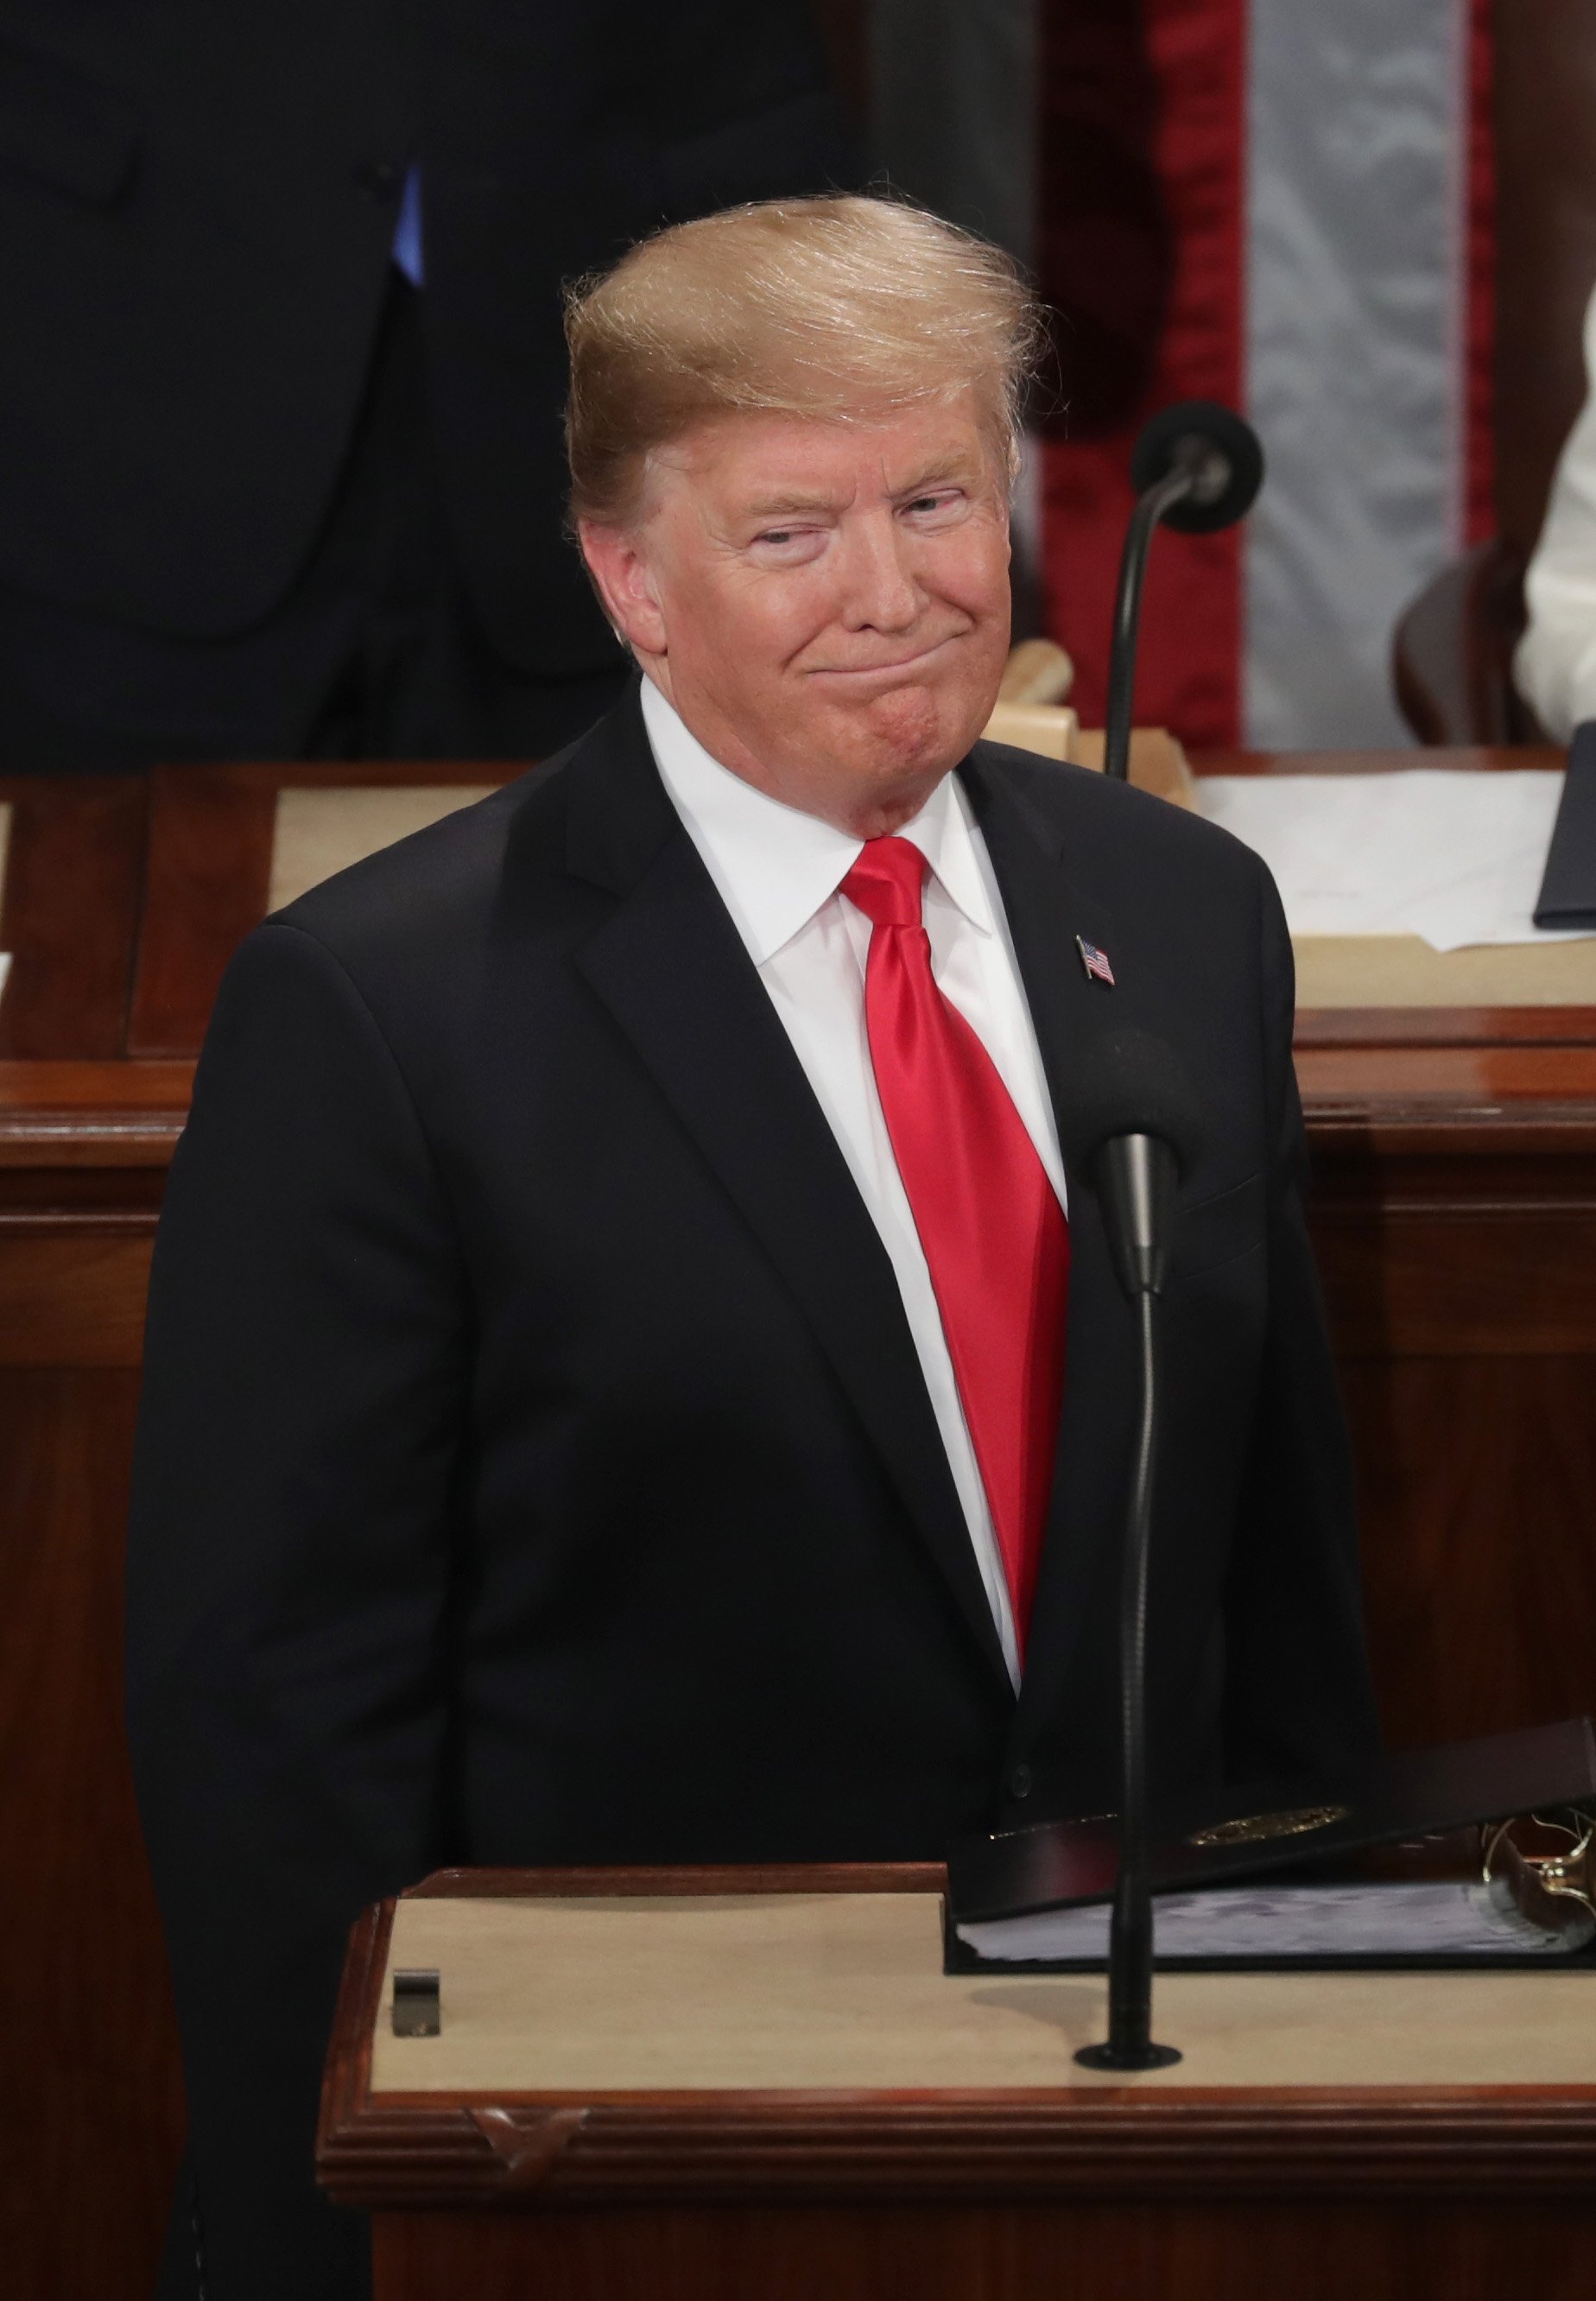 President Donald Trump at the 2019 State of the Union address | Photo: Getty Images